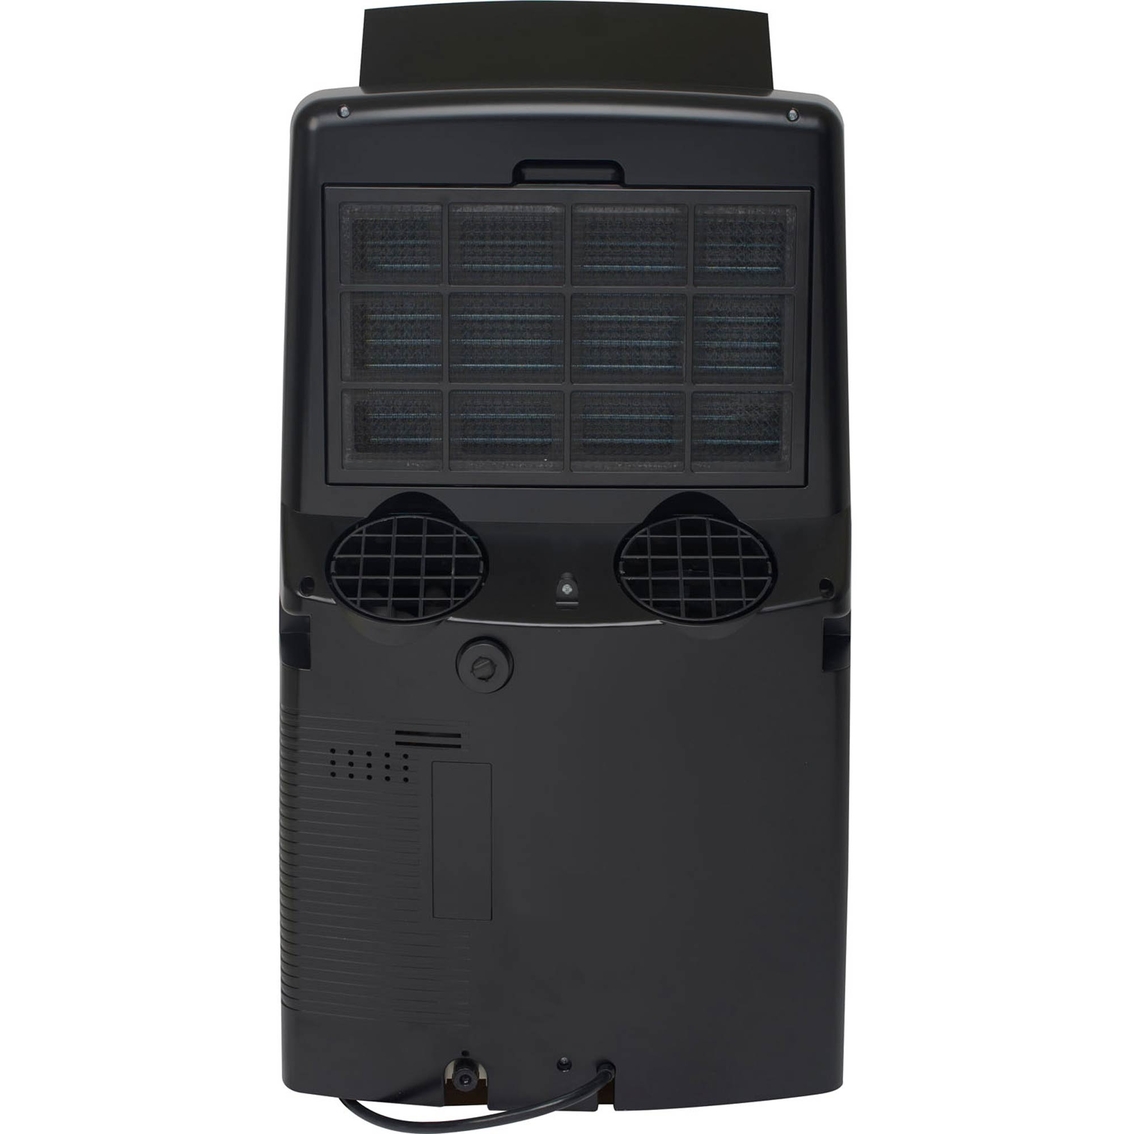 Honeywell 14,000 BTU Portable Air Conditioner with Remote Control, Black/Silver - Image 2 of 4